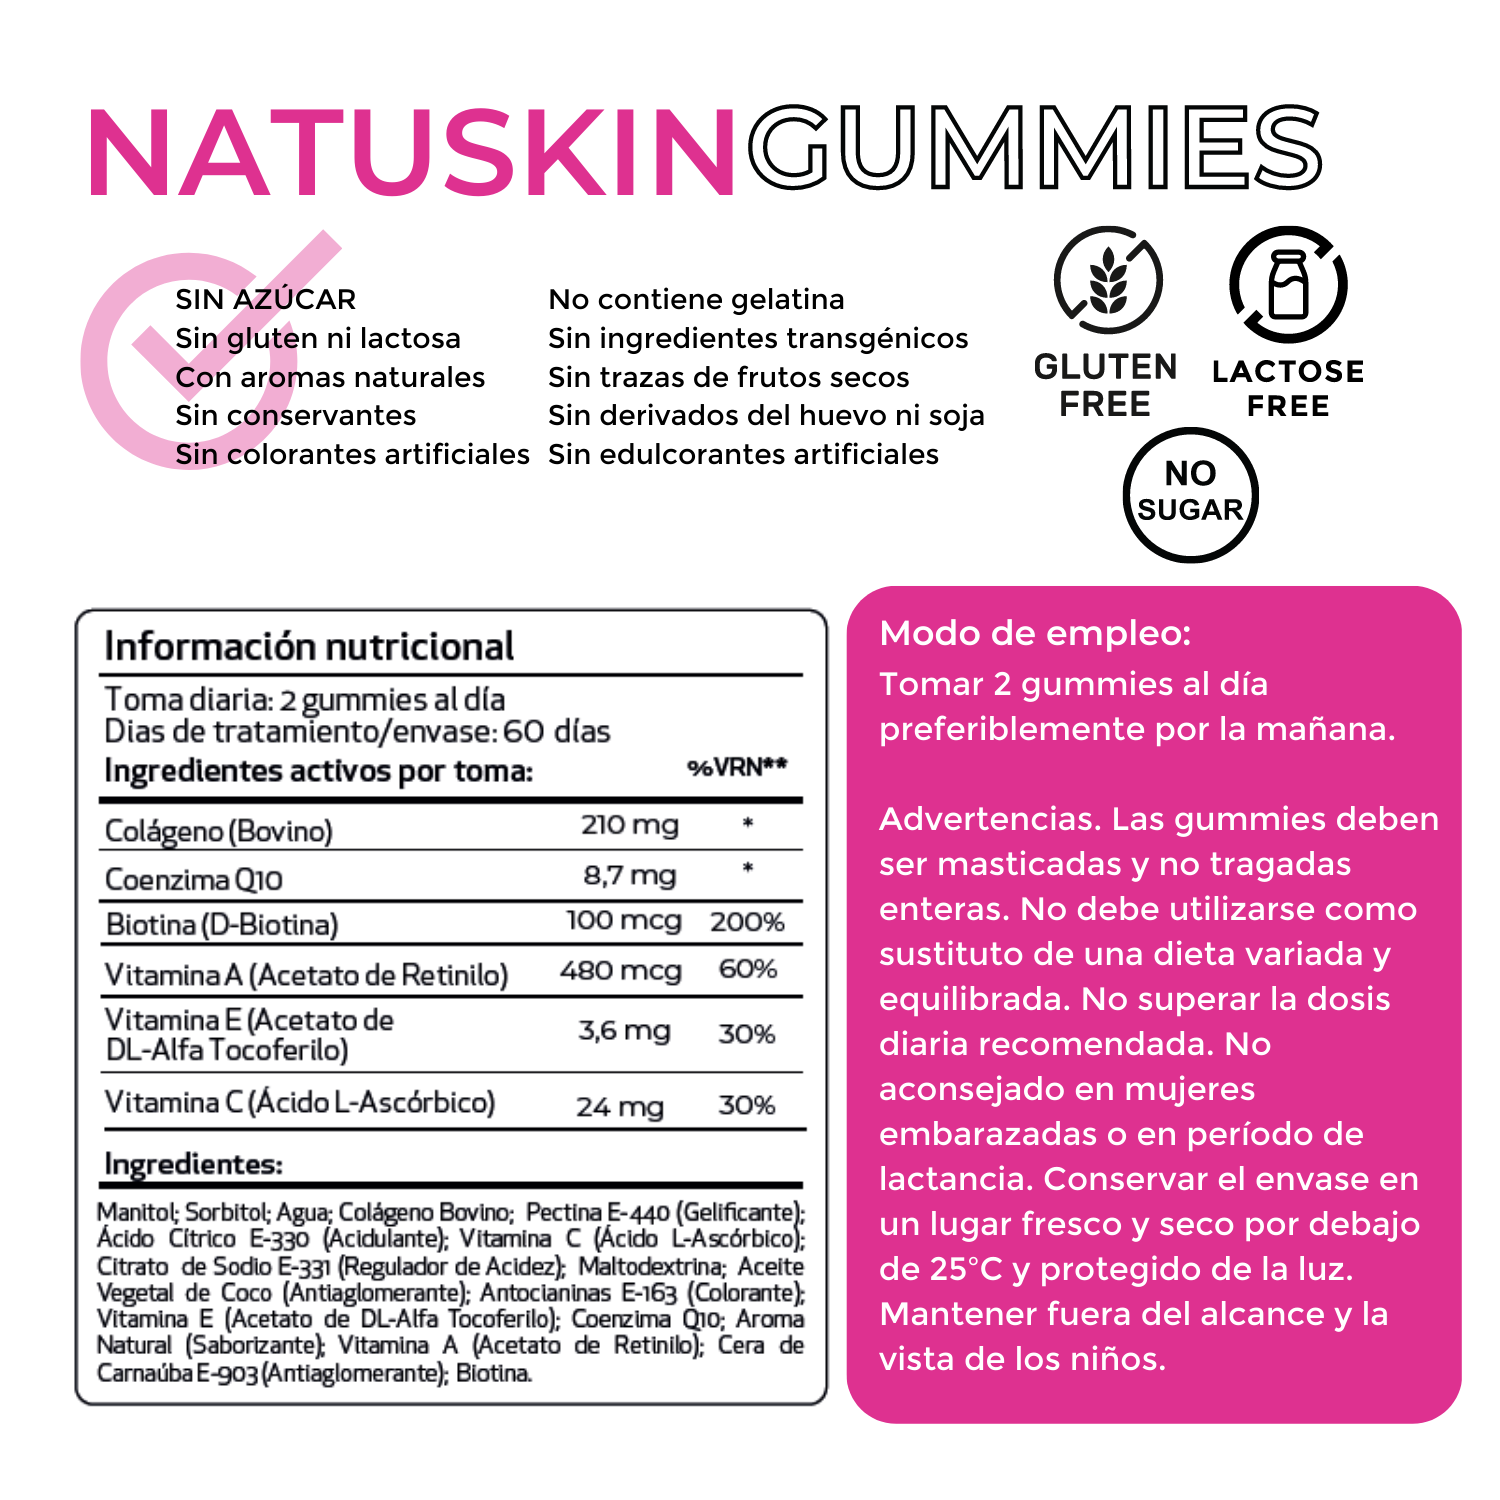 NatuSkin Gummies – With Collagen for sublime skin- 1 month